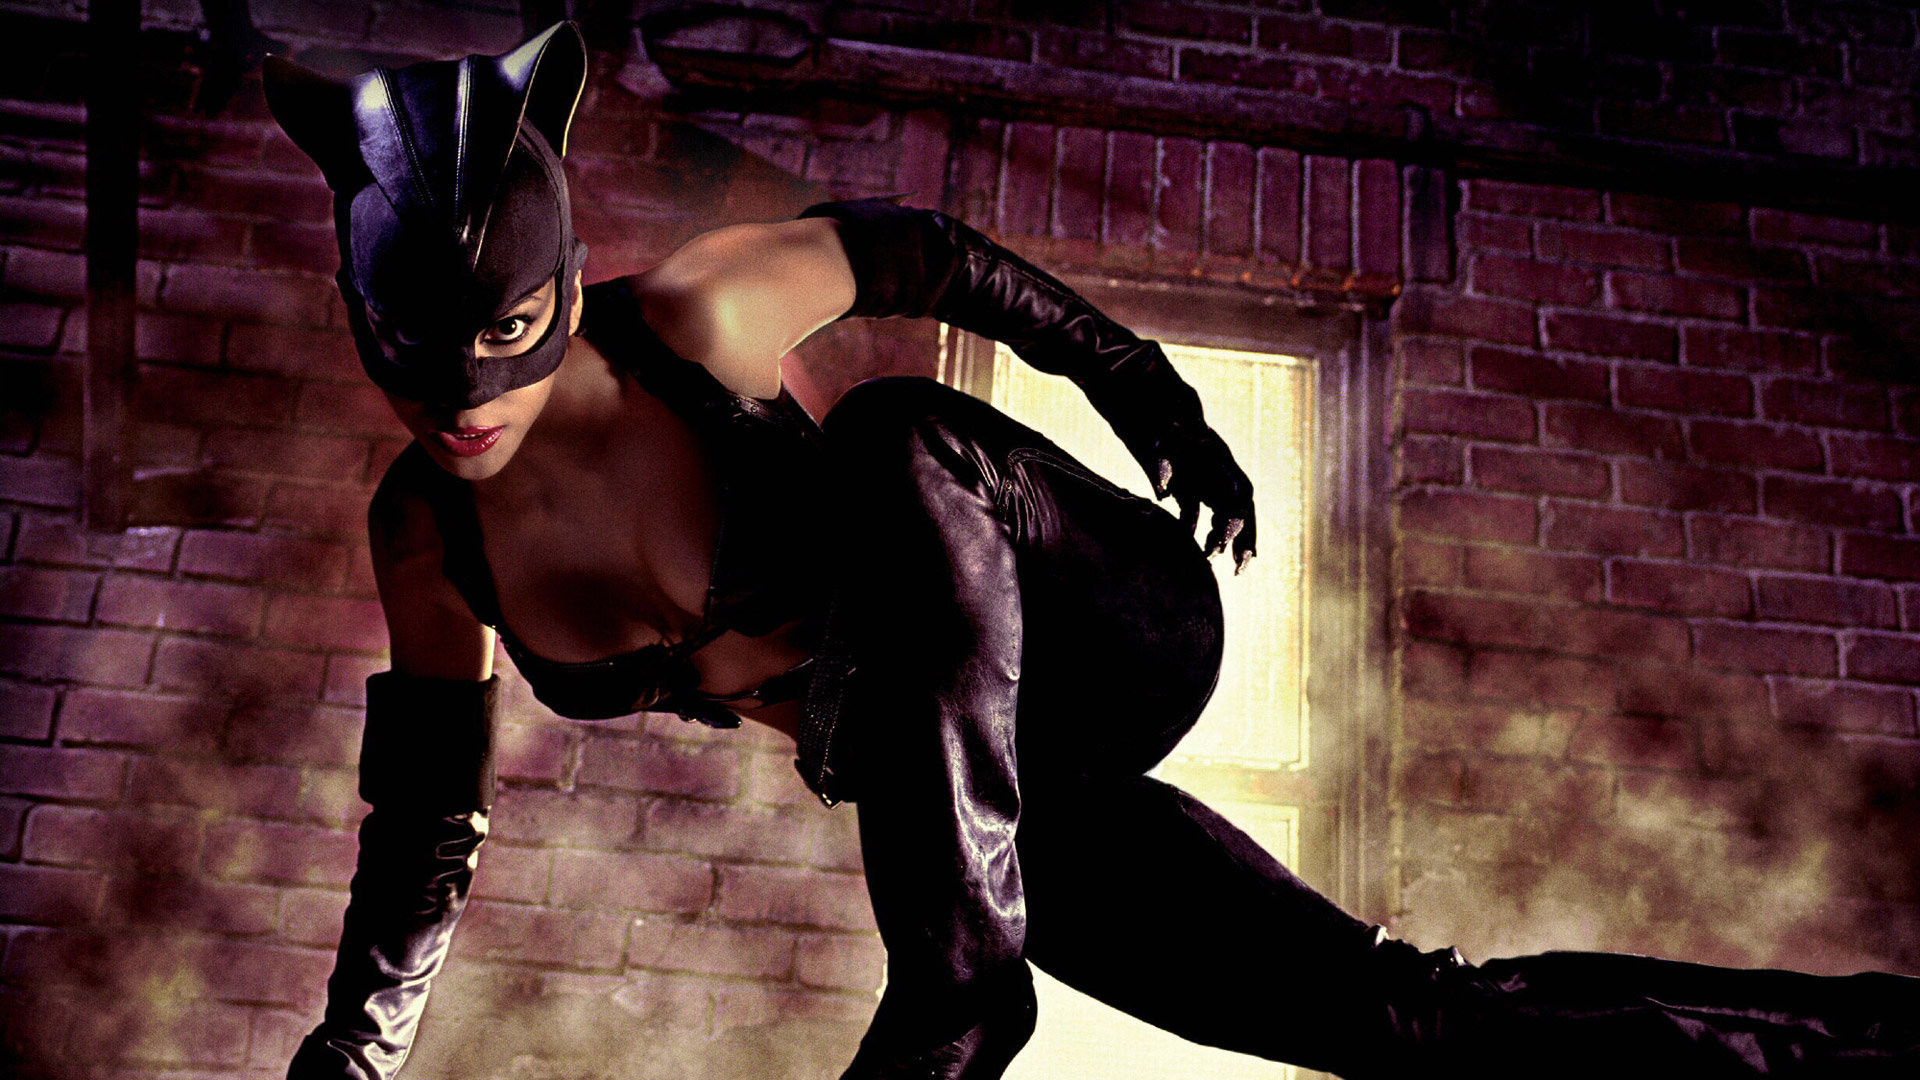 <p>In the wake of the success of "Batman Returns," Warner Bros immediately began developing a spinoff for the film’s breakout star, Catwoman. Initially, the studio wanted Michelle Pfeiffer to reprise the role she’d flat-out nailed in the 1992 sequel but turned away from the dark tone of Burton’s Batman movies when Joel Schumacher’s “Batman Forever” was a smash in 1995. The project went through different iterations (Ashley Judd was once in talks to star) before the studio went with Halle Berry in the title role. The 2004 film was directed by an idiosyncratic French director named Pitof and is now considered one of the worst comic book movies ever made.</p><p>You may also like: <a href='https://www.yardbarker.com/entertainment/articles/20_films_that_should_have_a_prequel/s1__38606812'>20 films that should have a prequel</a></p>